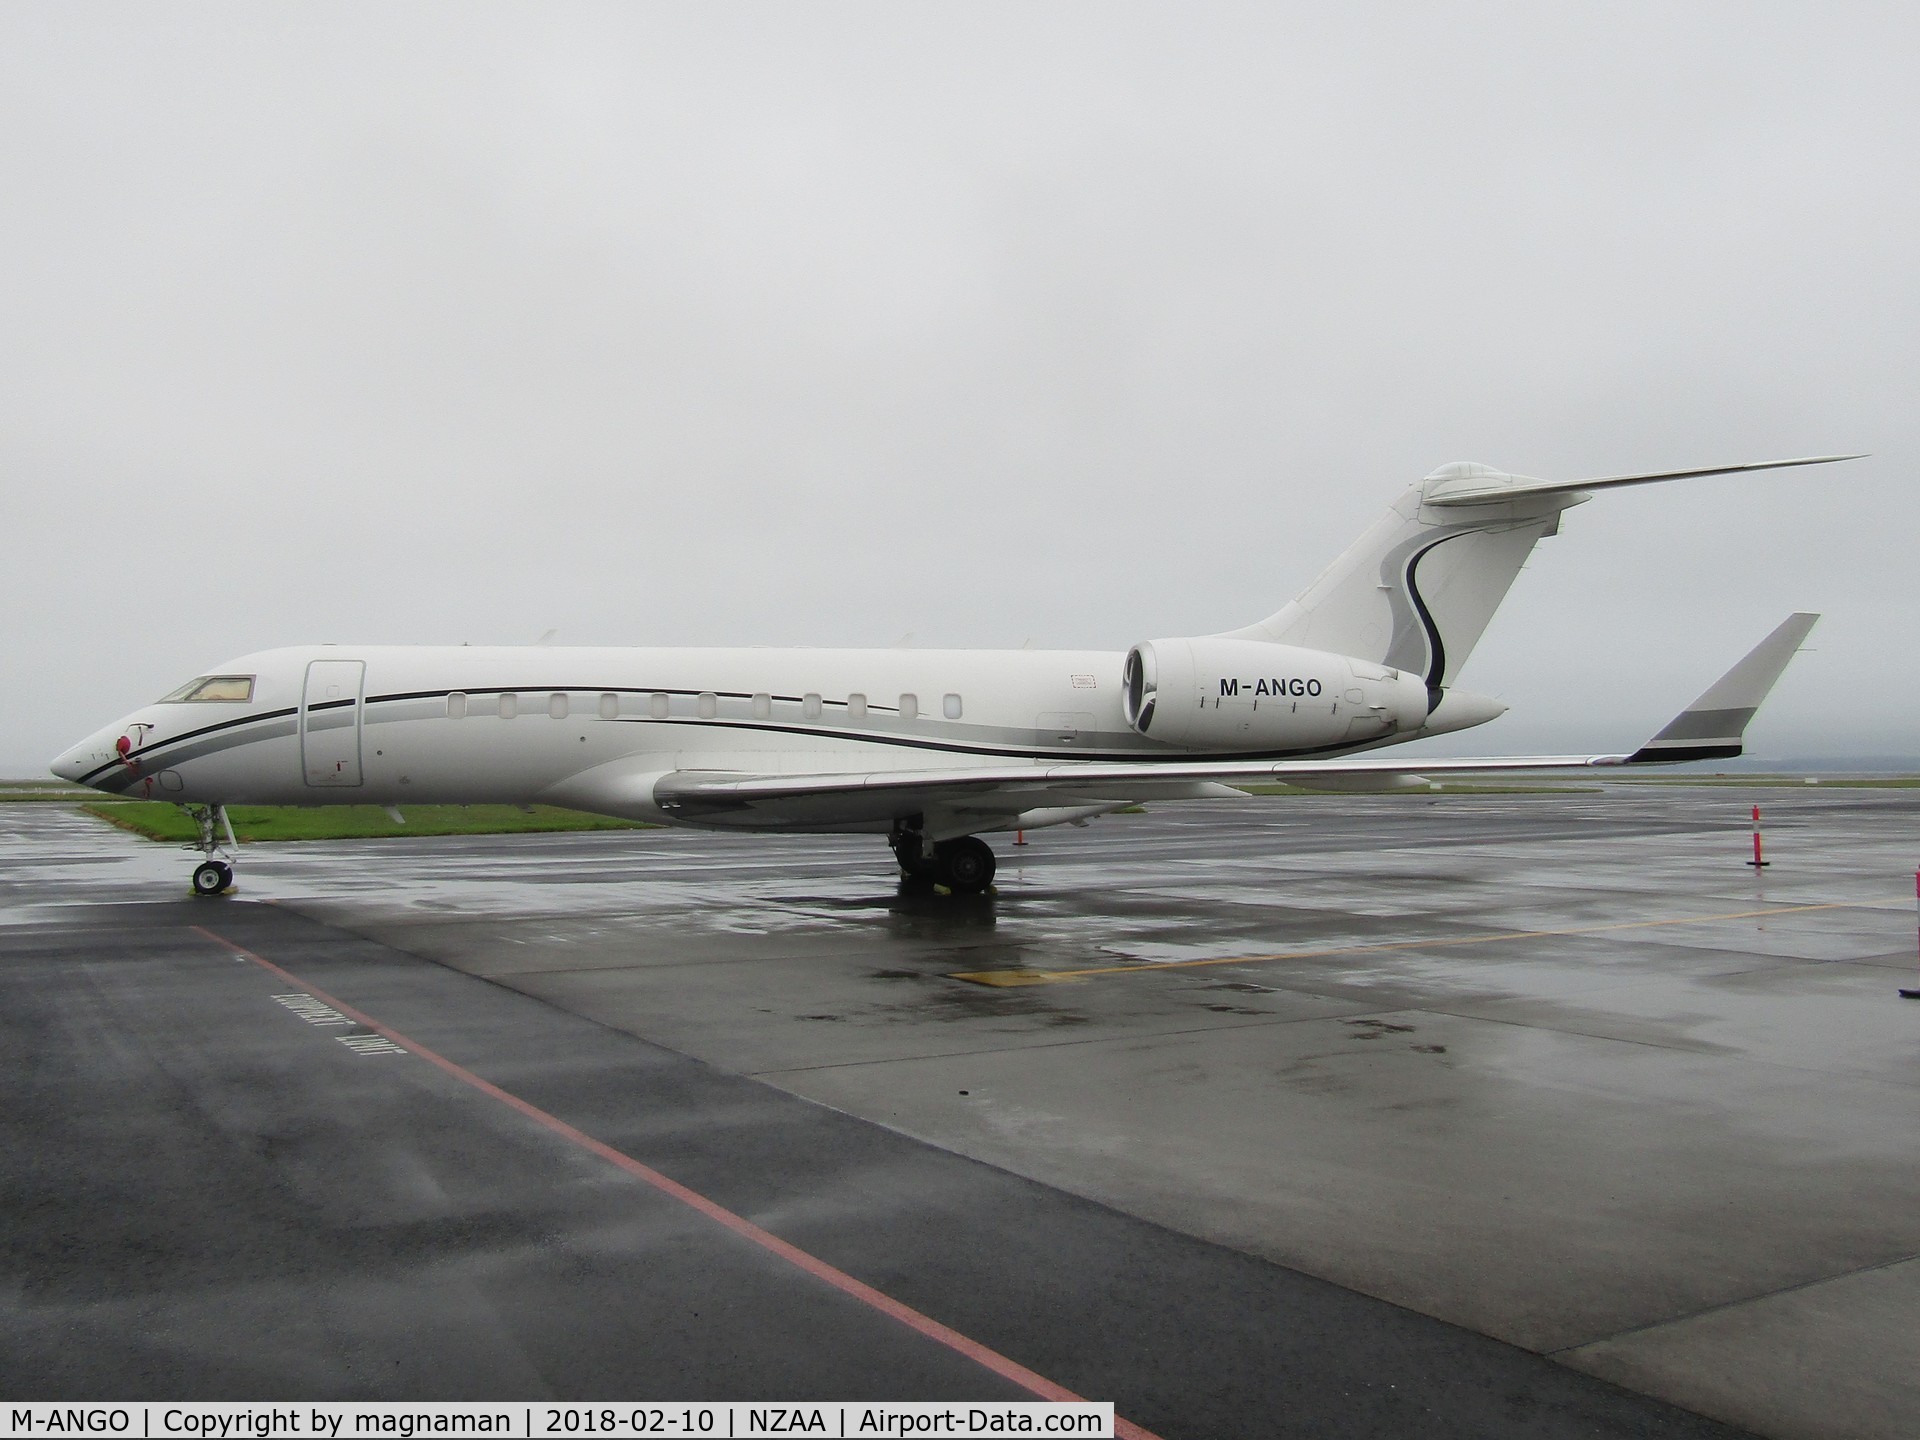 M-ANGO, 2005 Bombardier BD-700-1A11 Global 5000 C/N 9172, fruity visitor